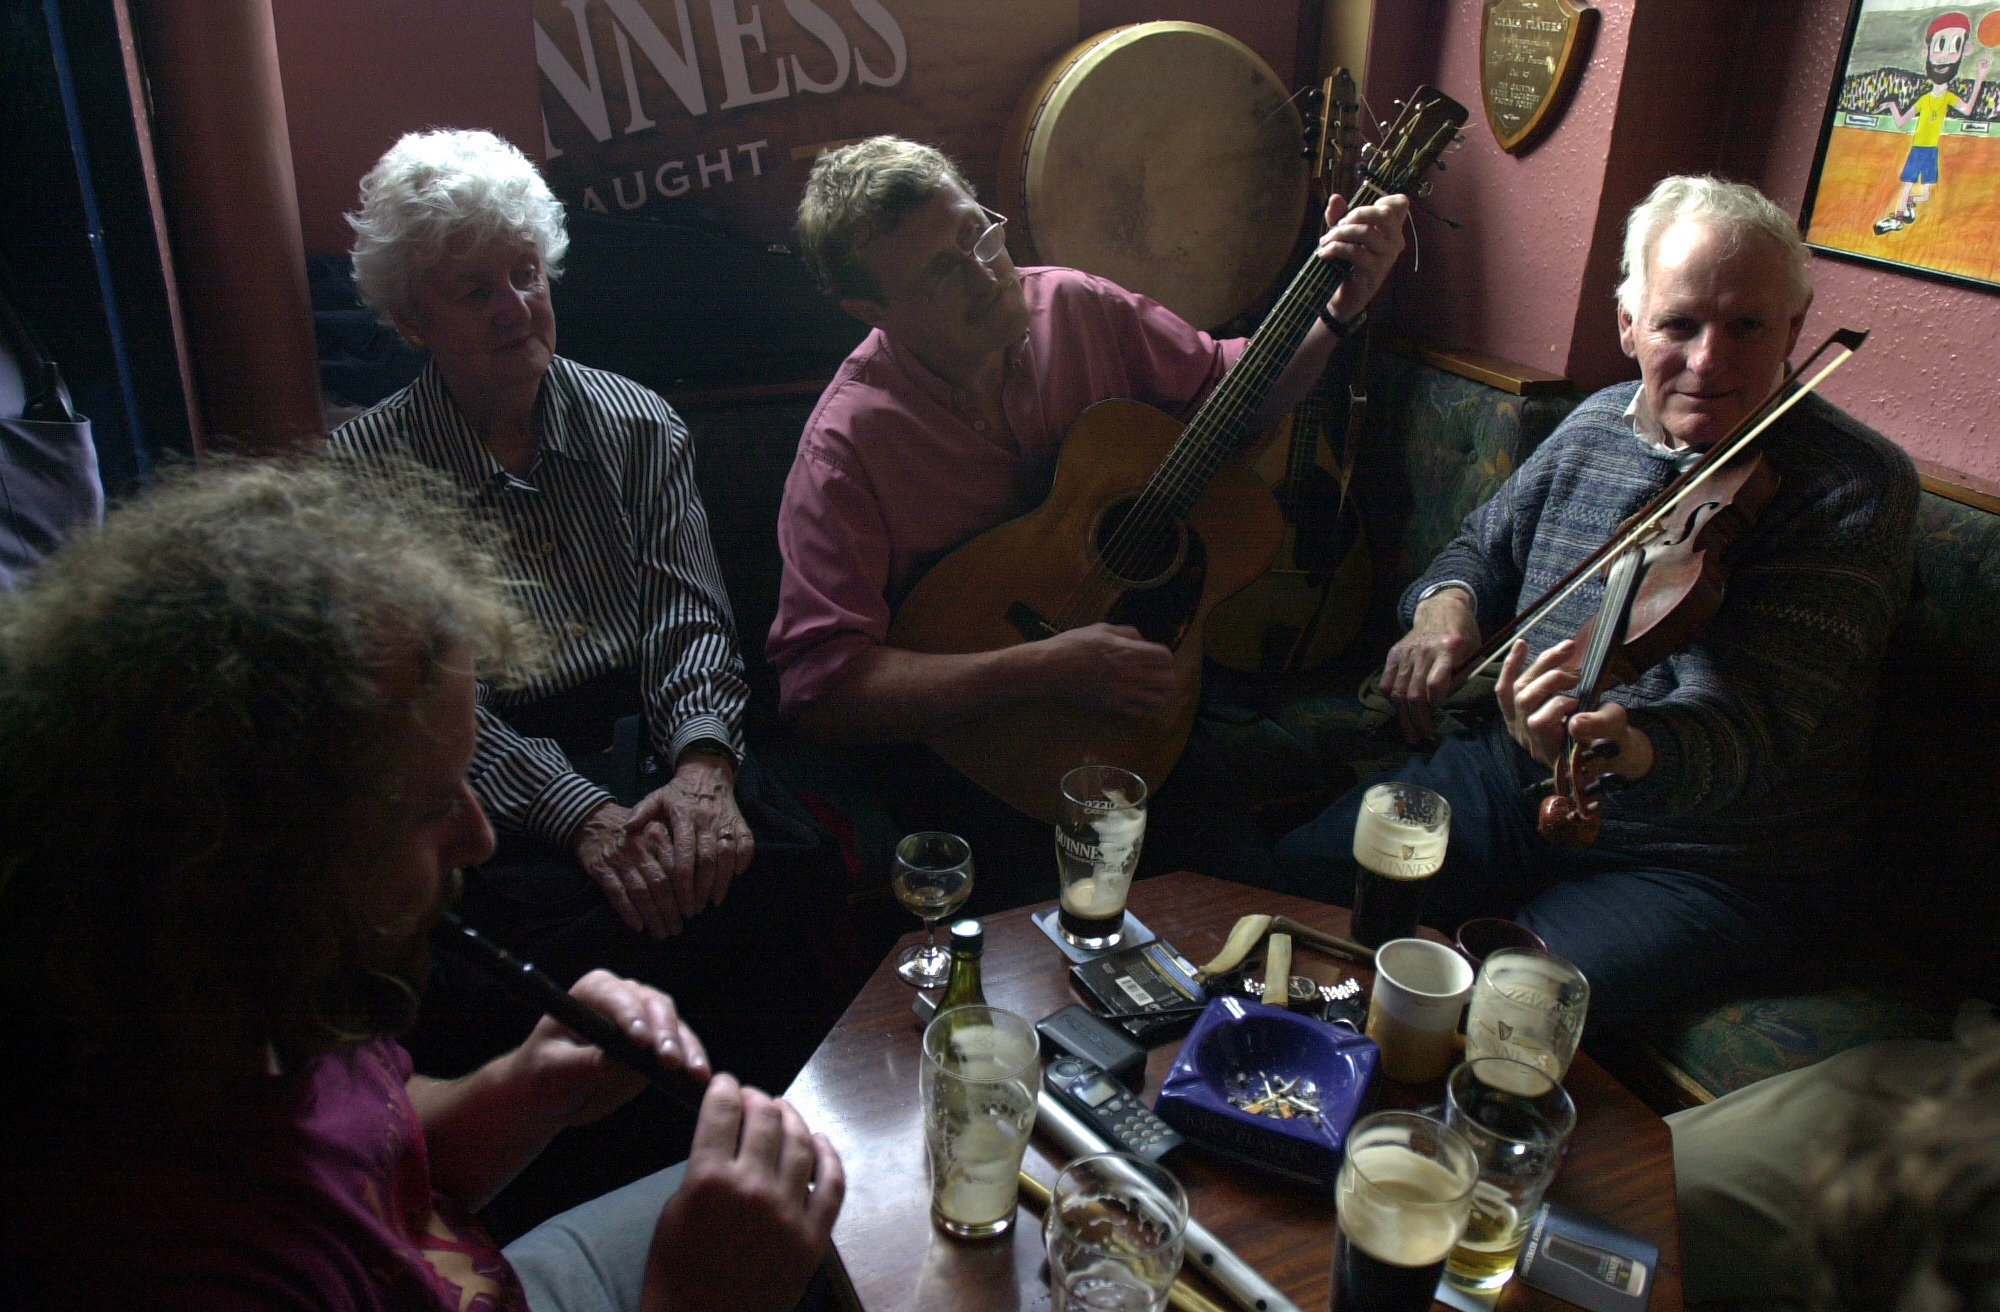 File photo from 2002 shows musicians playing in a pub in Killorglin, Co Kerry.